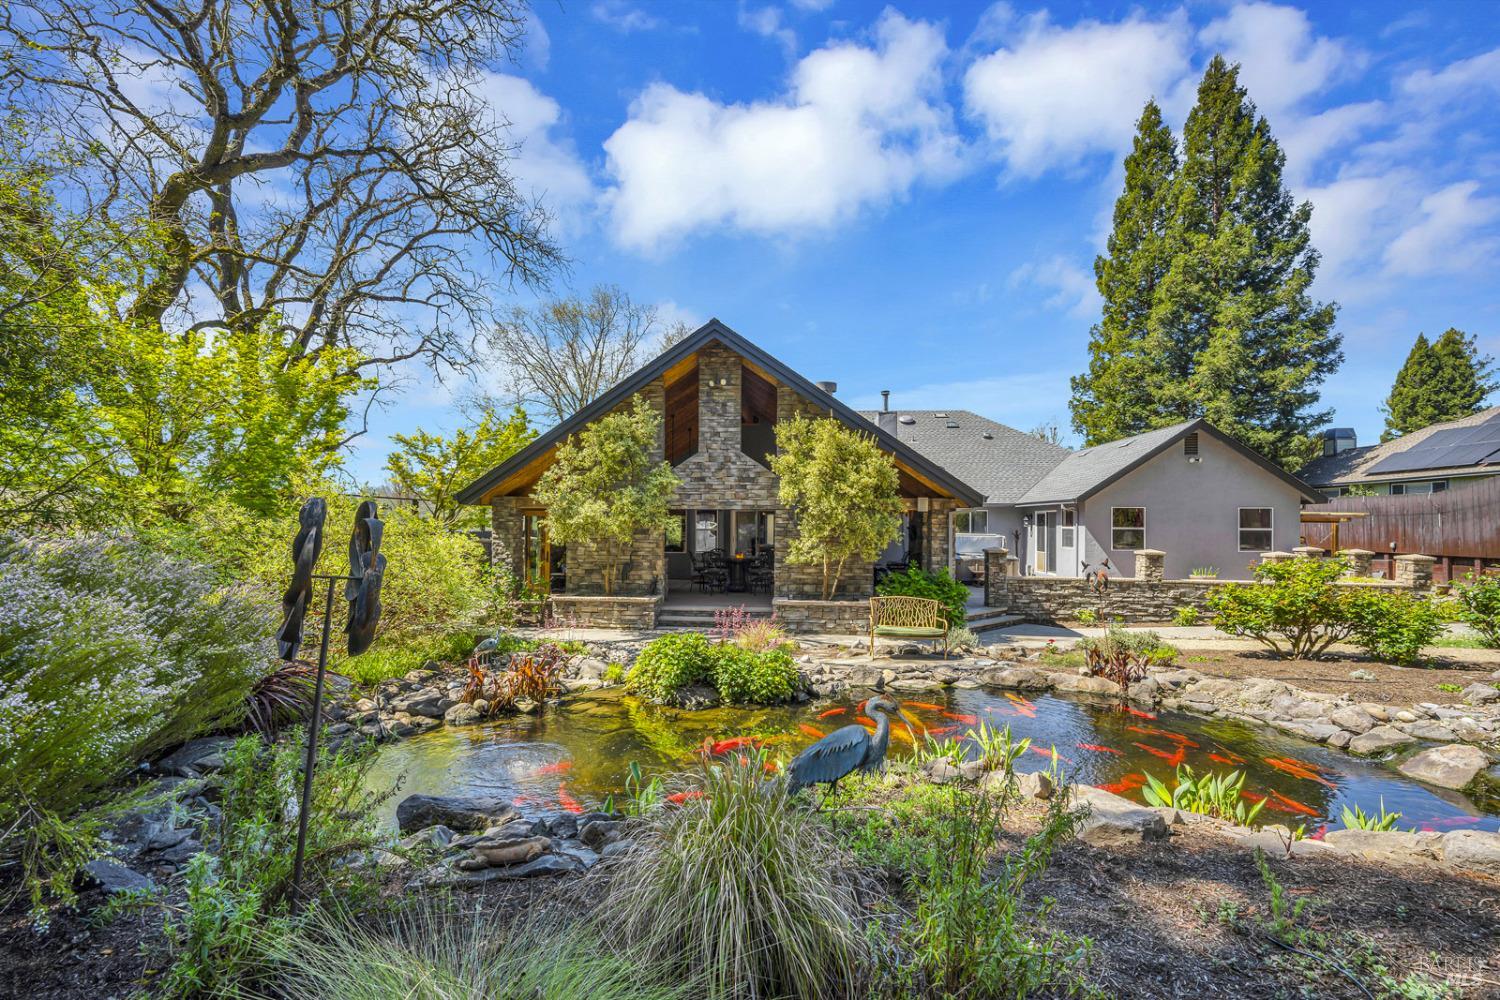 This single-level Oasis has the best of all worlds. It's located where Sebastopol & NW Santa Rosa meet Forestville, adjacent to vineyards & the country but with all the conveniences of city water, sewer, solar & a generator back-up.  This home has 2,693+/- sq. ft., 4 large bedrooms, 2.5 baths, & a 3-car garage w/a shop built in 1 garage bay. Its design is open with vaulted ceilings in the main living areas. It has a wonderful outdoor entertainer's room that looks over a gorgeous rear yard with its own Koi Pond, waterfall, walking paths through flowers, wisteria & more, all on a half acre. The spacious primary bedroom has a luxurious stone slab Master Bath with radiant floors & a walk-in closet, along with glass doors to the hot tub outside.  This home offers ample space & privacy on all sides being a corner lot with no neighbors behind it & only one neighbor on one side.  In addition to the entertainer's outdoor room, you'll enjoy wrap-around decks along the side & front corner, all fenced & topped with glass paneling to maintain the country views.  Everything throughout this home & property has been meticulously cared for, so that it can now be offered to you in move-in condition.  Recent upgrades include a new roof & HVAC.  All inspections are available.  This won't last long.